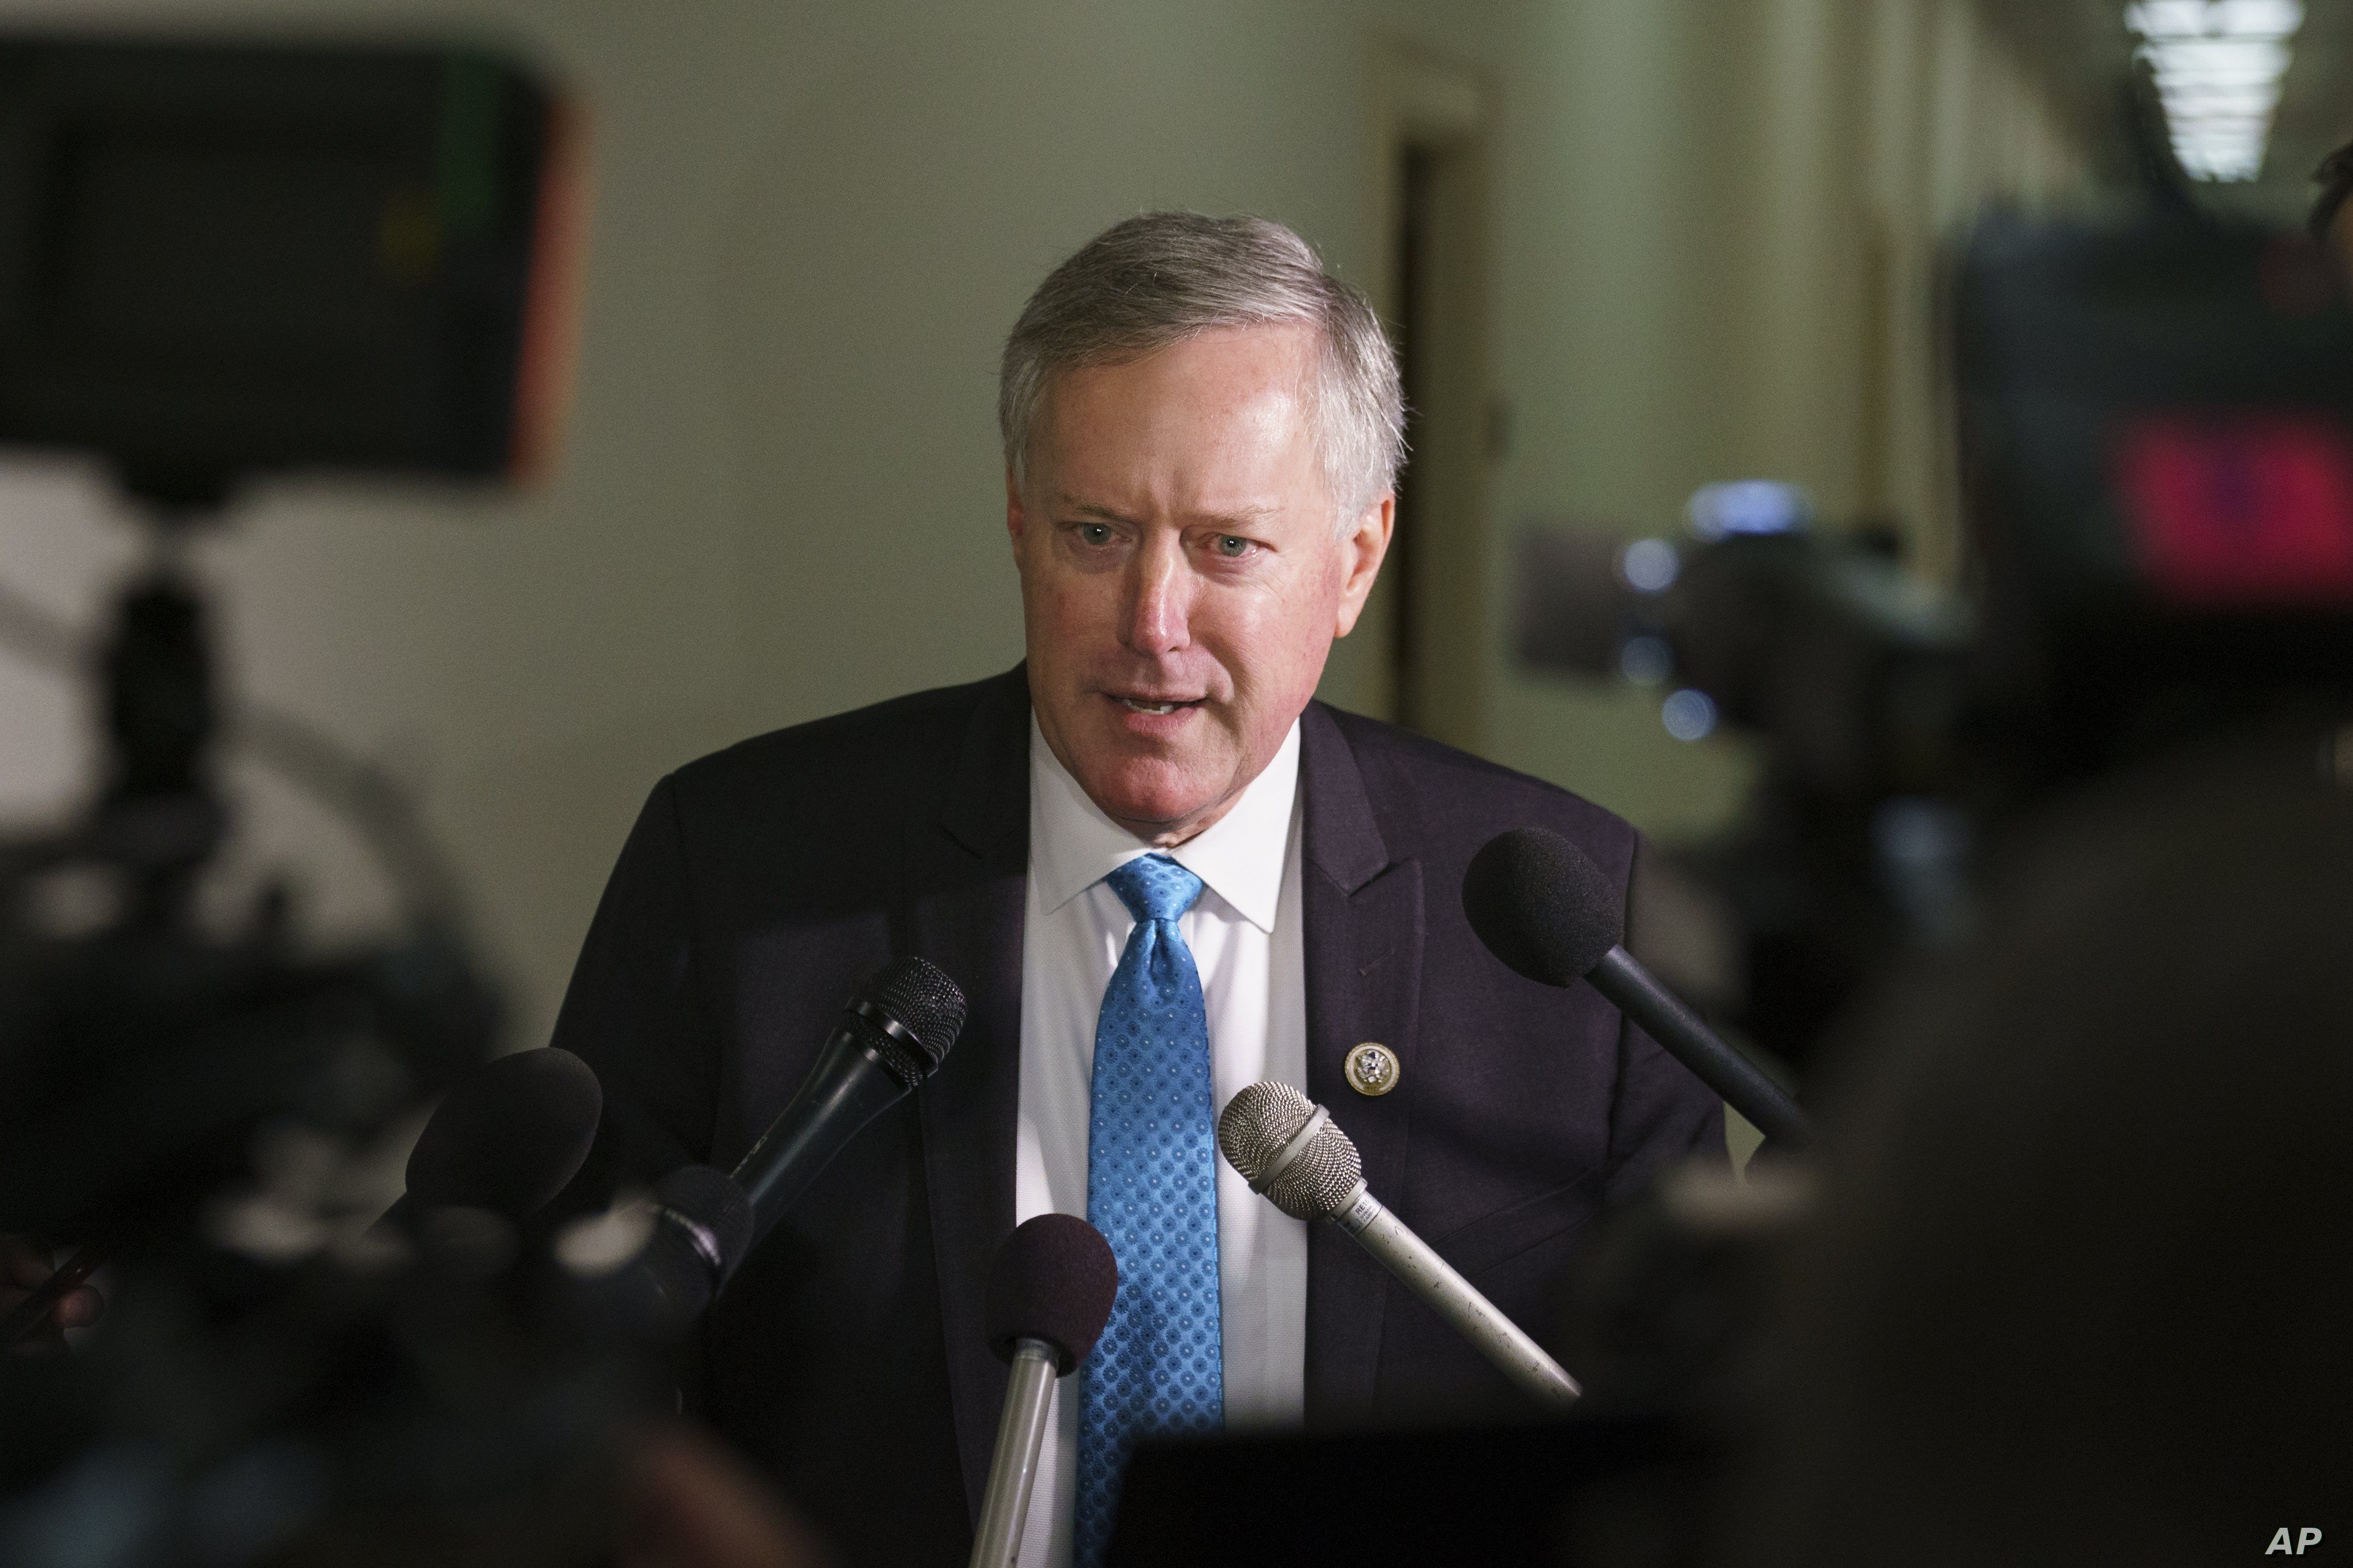 FILE - Rep. Mark Meadows, R-N.C., speaks to media on Capitol Hill in Washington as lawmakers clashed over science, ethics and politics at a House hearing, Dec. 13, 2018.